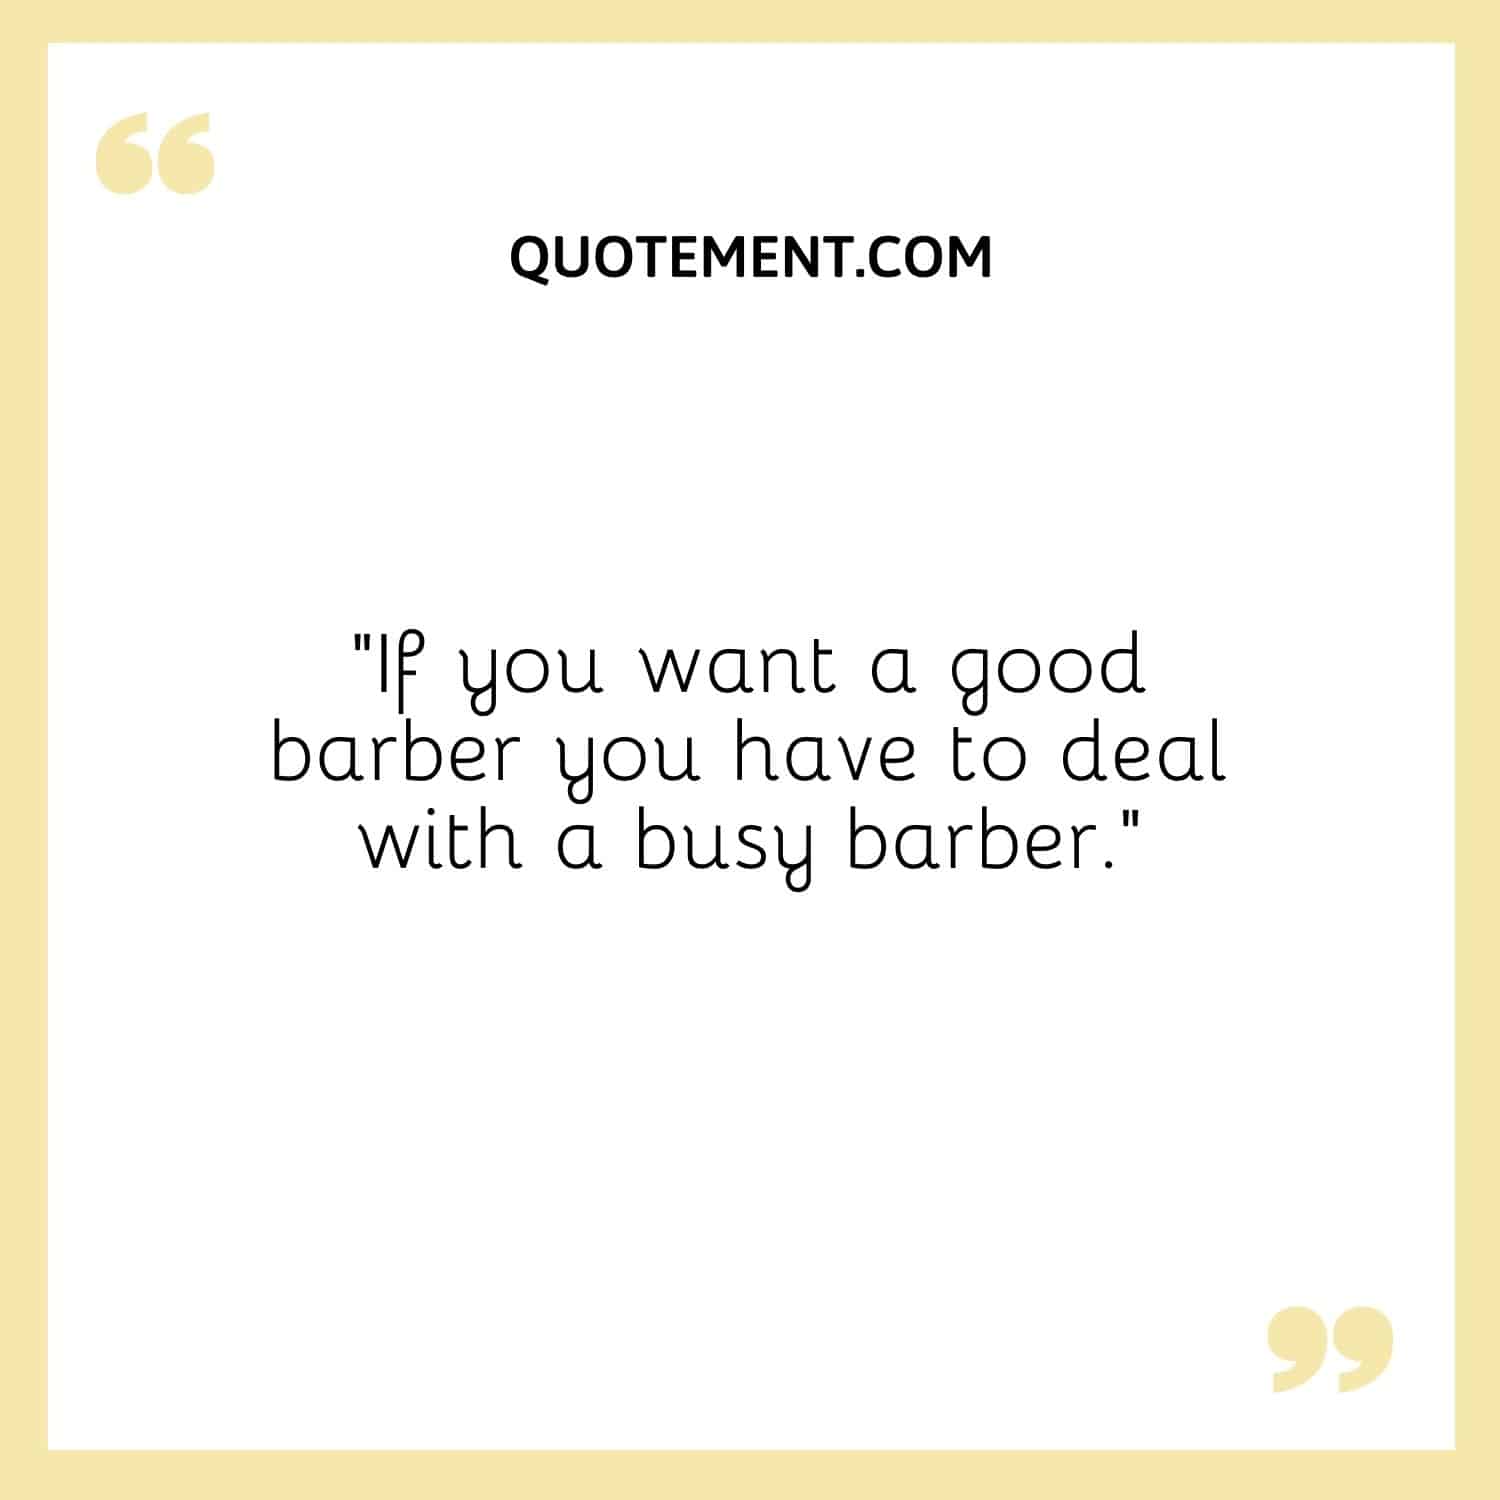 If you want a good barber you have to deal with a busy barber.